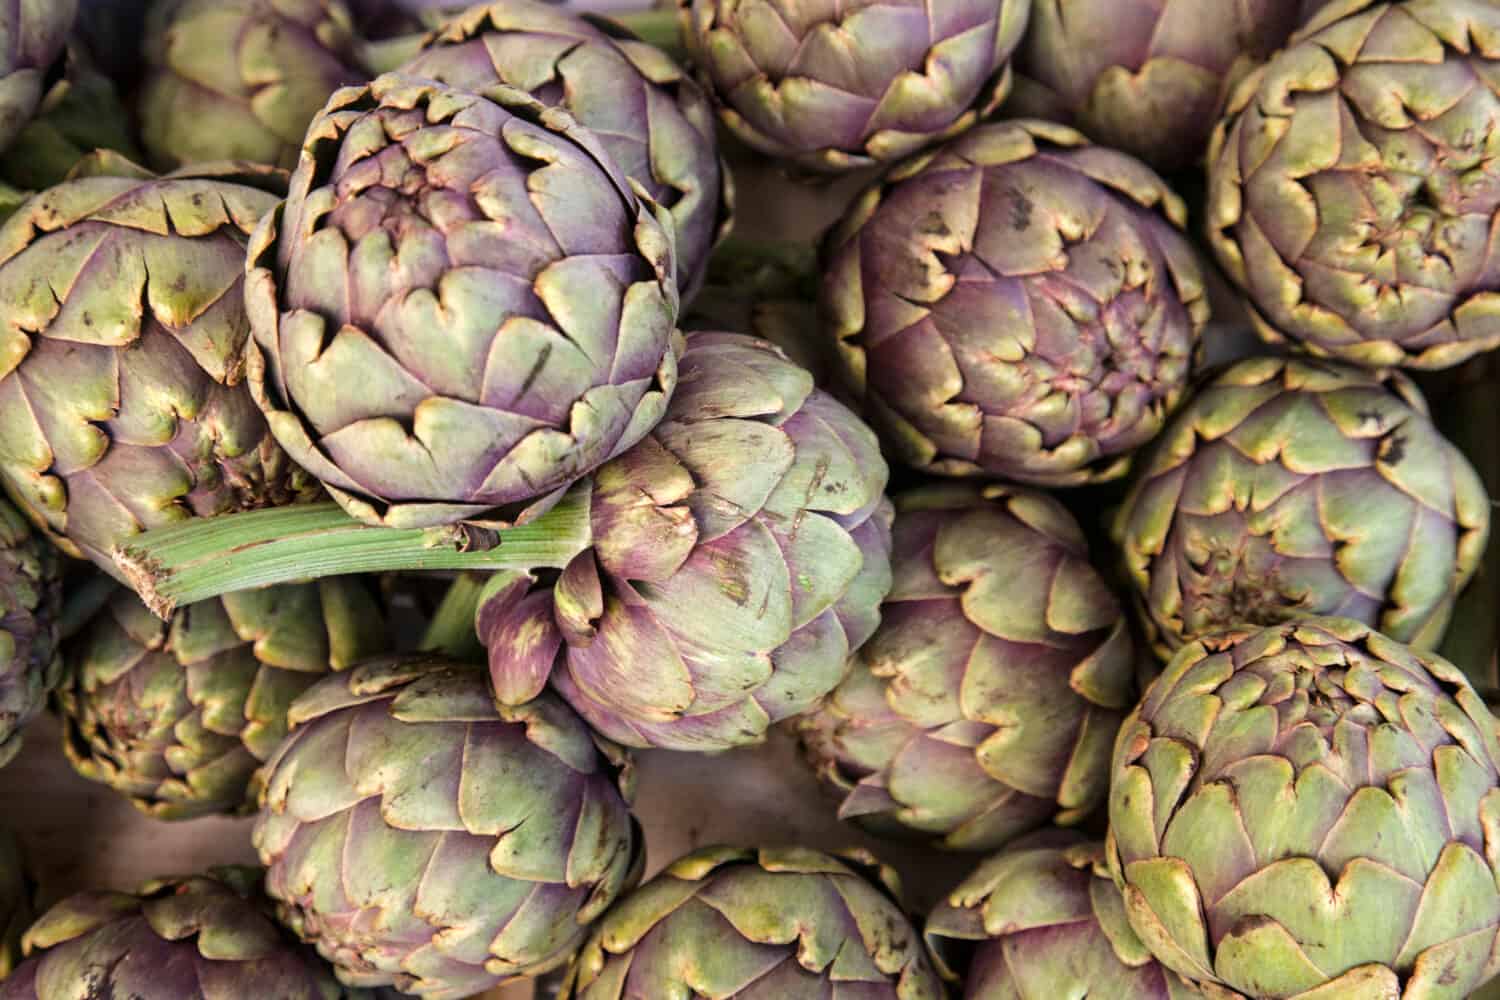 Grown in the Aquitaine Provence of France, these artichokes were being sold at the Bergerac open air market in the spring.